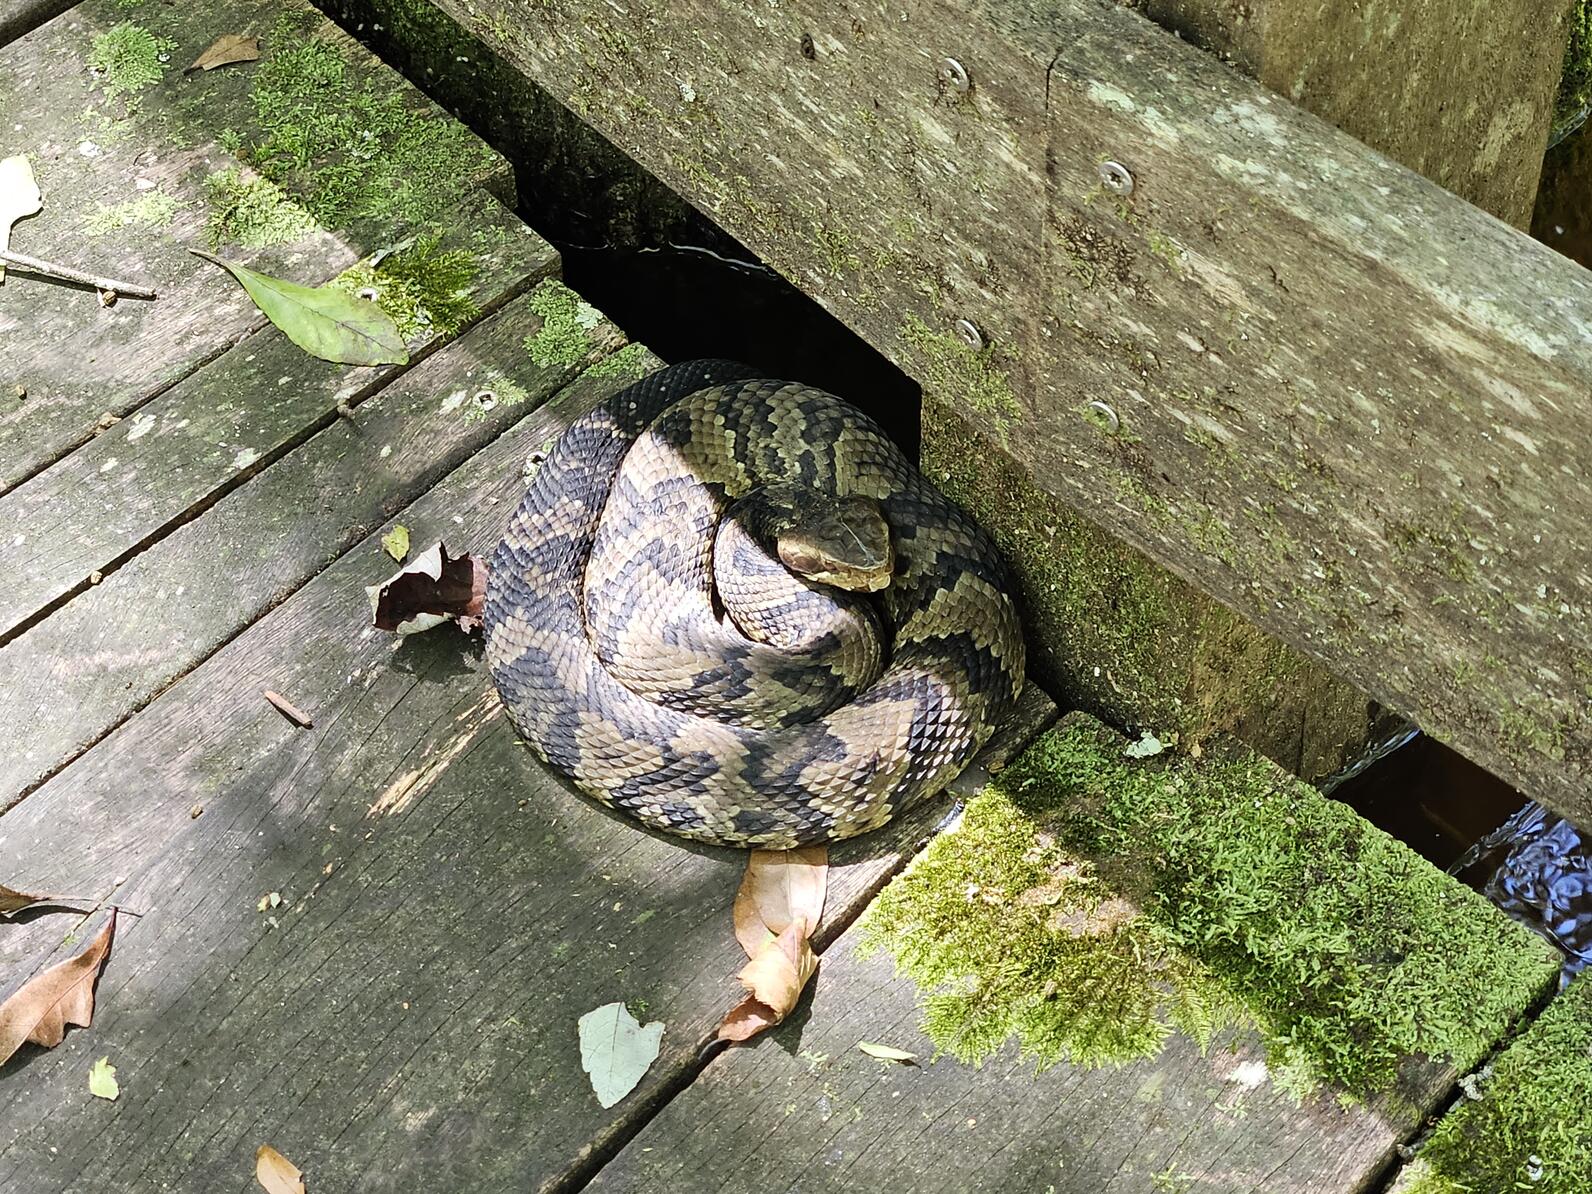 A Cottonmouth is coiled on the deck against the post of the boardwalk, its mouth is closed but it is facing our direction, it knows we're here but hopes to avoid our attention by staying still.